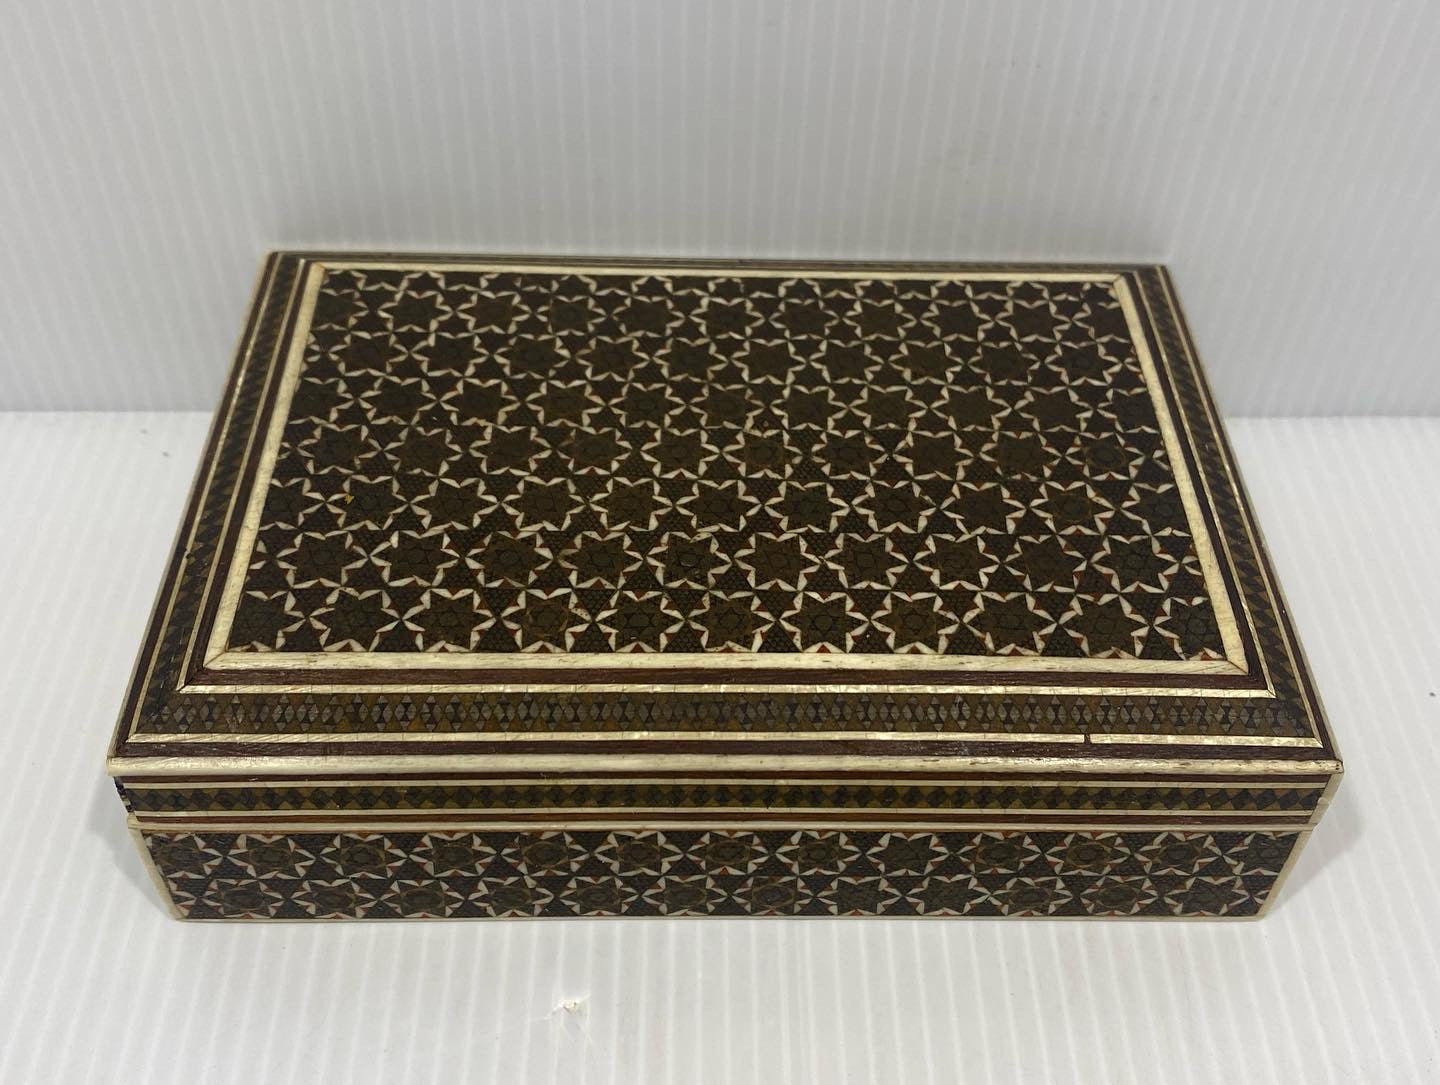 Beautiful vintage Handcrafted Khatam wooden box with very delicate micro mosaic marquetry from the ancient Persian technique